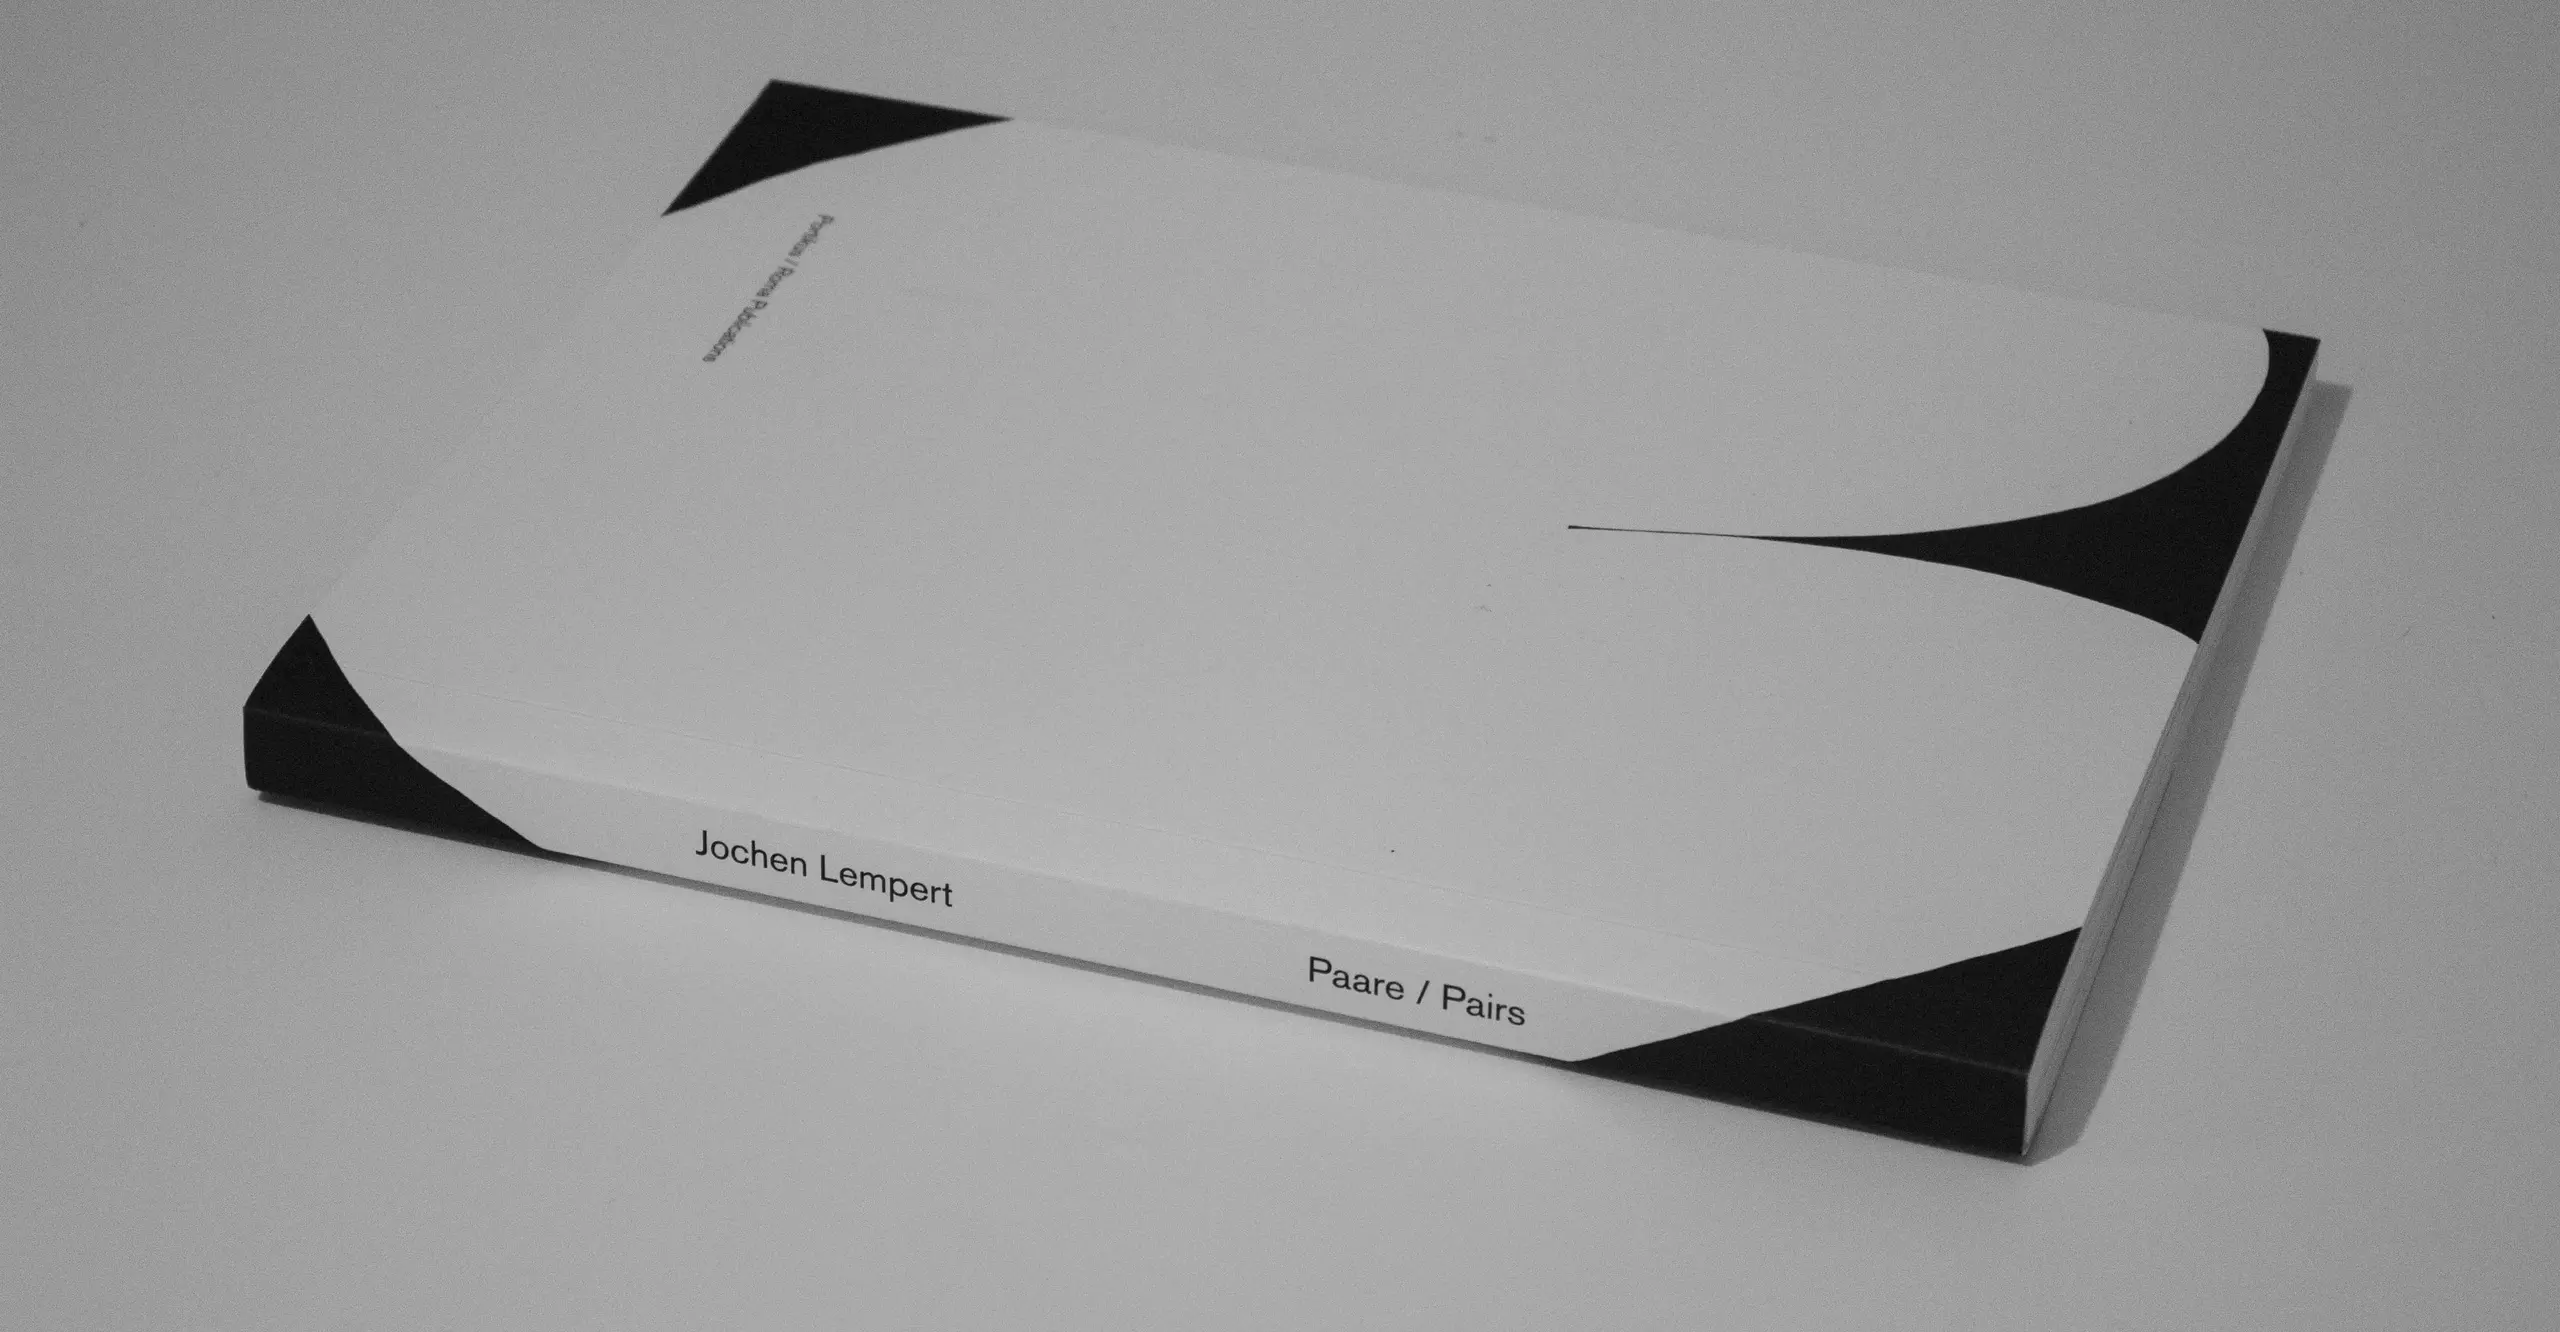 Image of the photobook. It is a short paperback, a white curved shape takes up most of the page with black corners